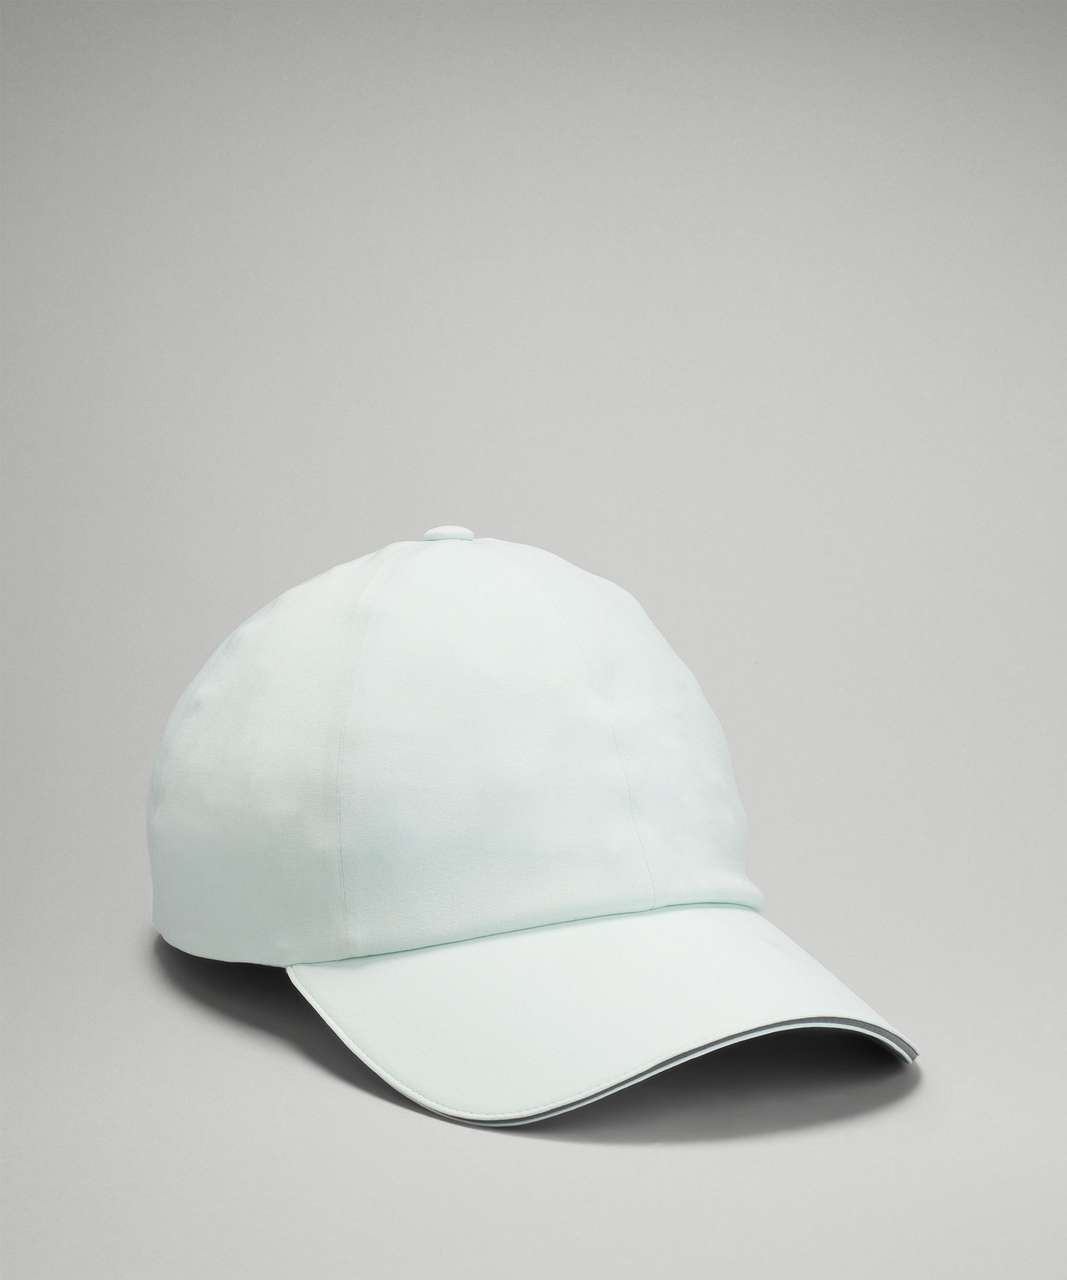 Lululemon Fast and Free Womens Running Hat - Delicate Mint